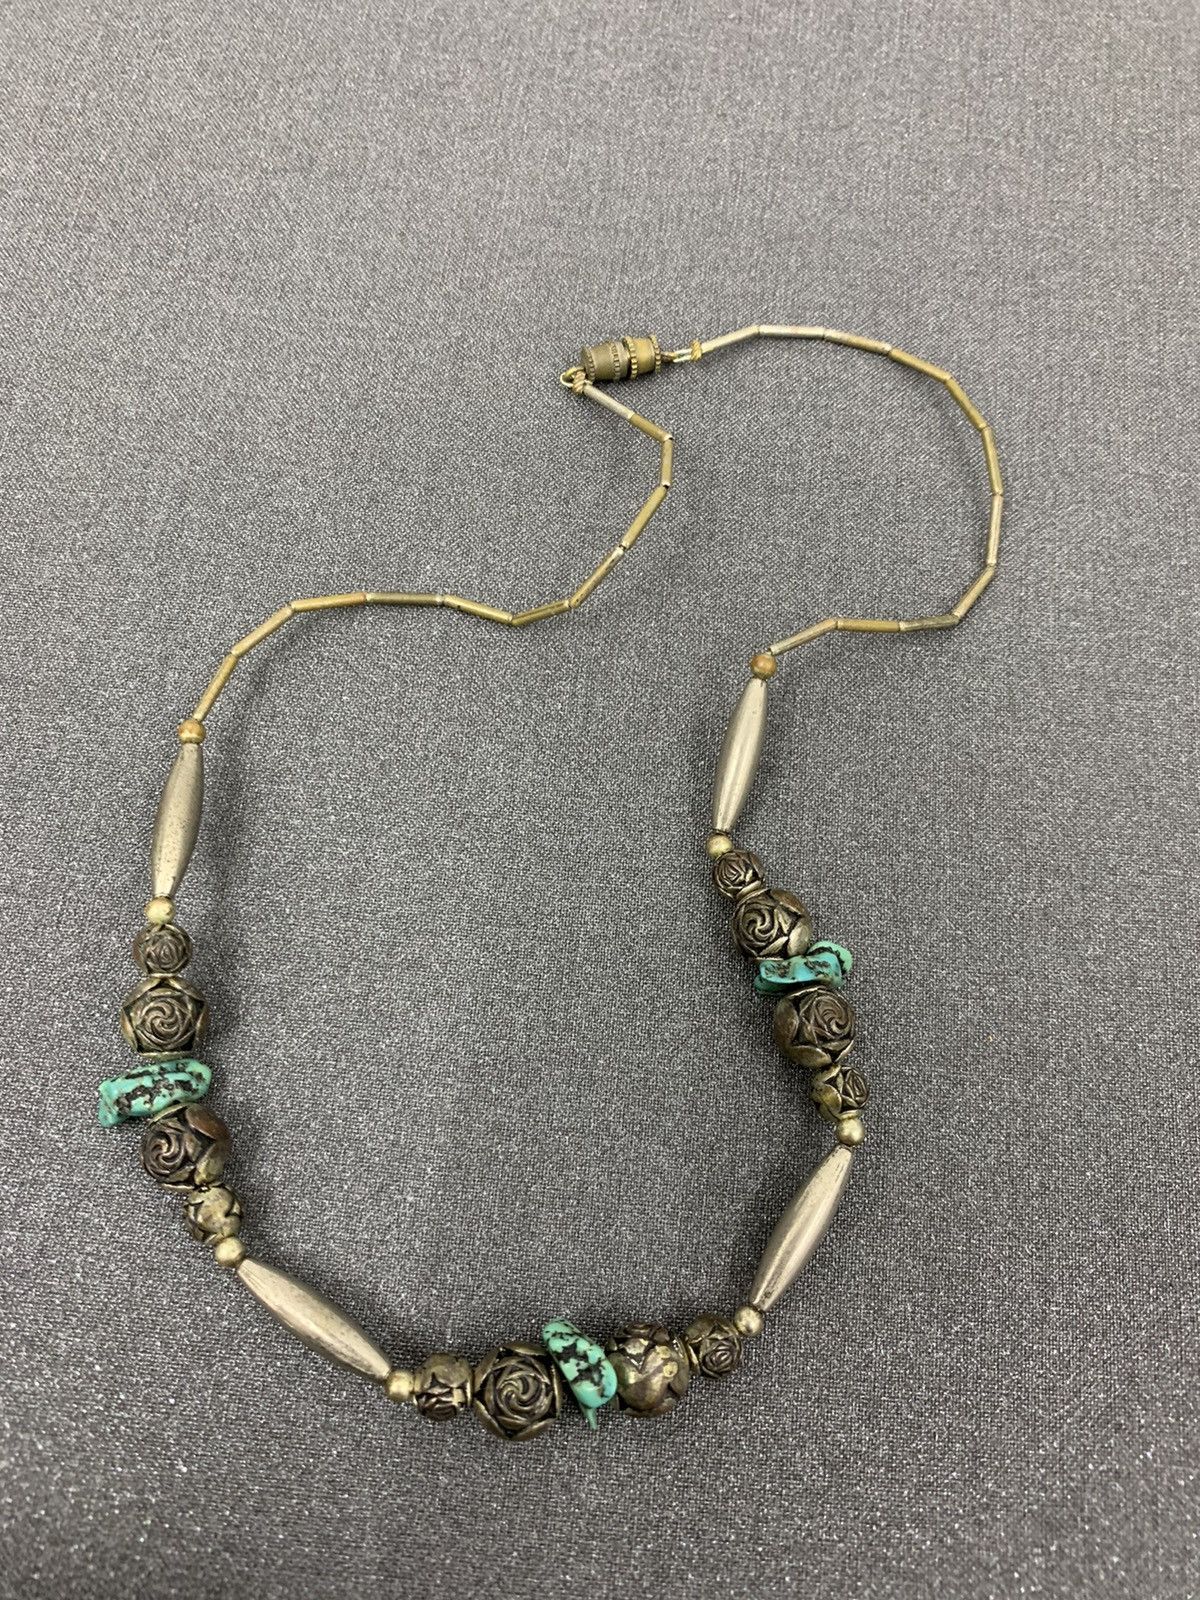 Vintage Silver Turquoise Native Necklace - 2